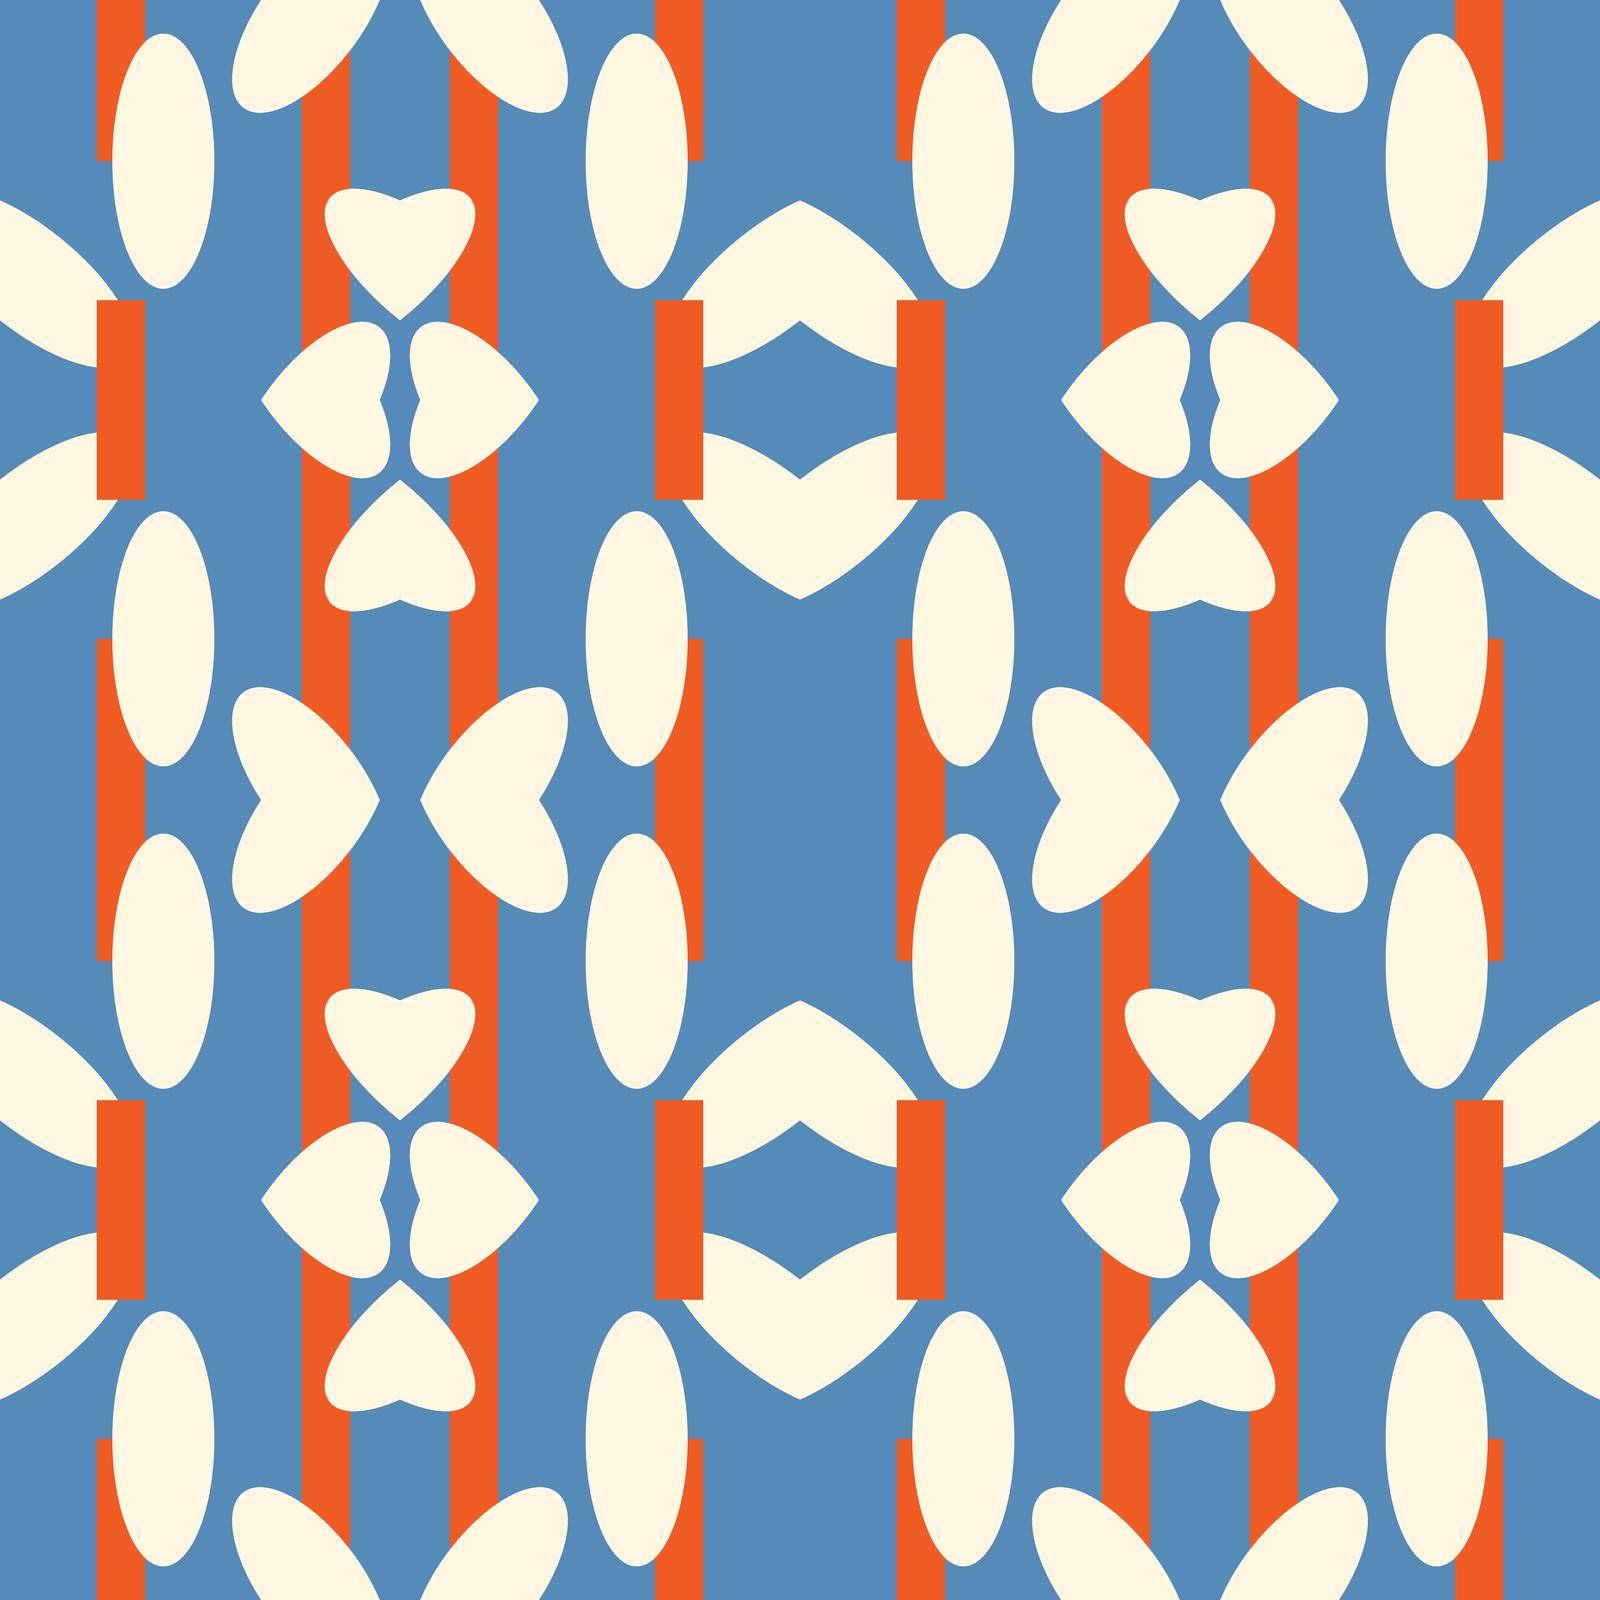 fashion design in the style of constructivism    fashion design in art deco style Background pattern with decorative geometric and abstract elements